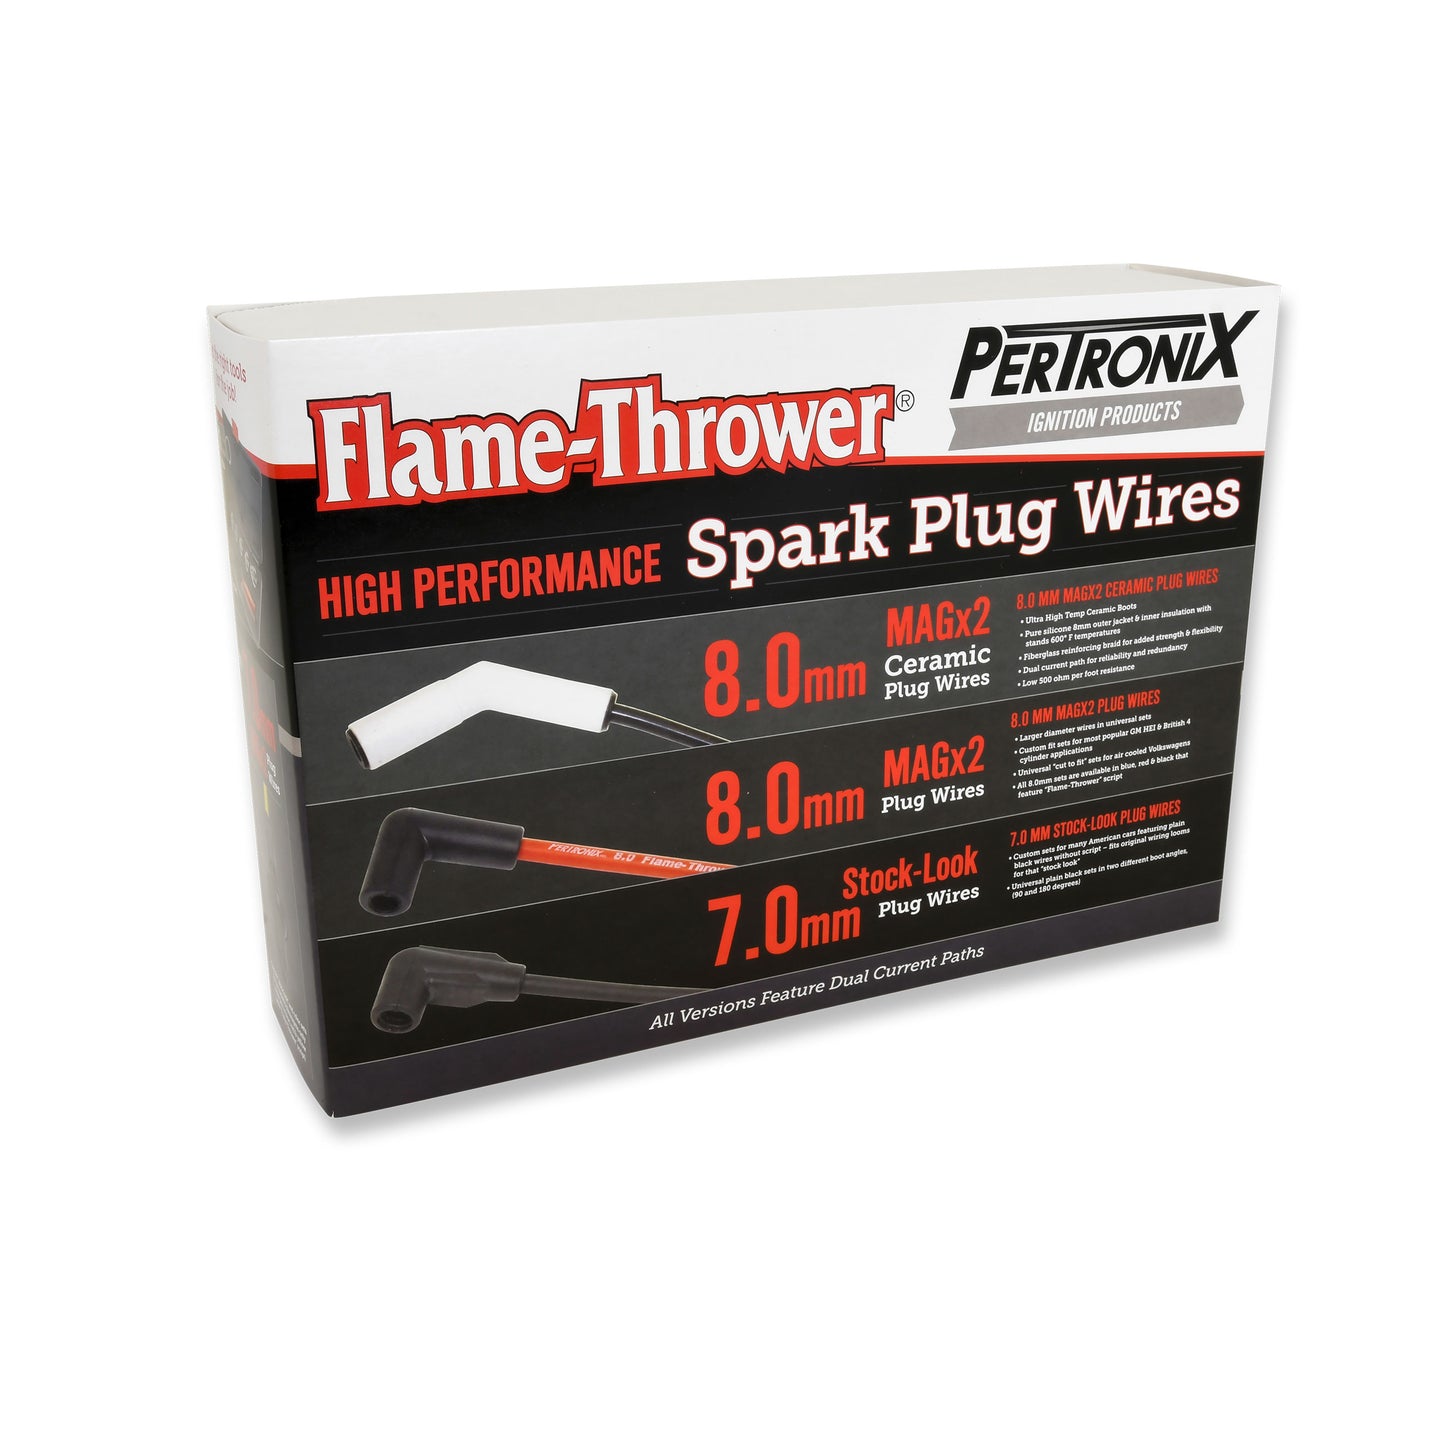 PerTronix 808280 Flame-Thrower Spark Plug Wires 8 cyl 8mm Universal 180 Degree Black